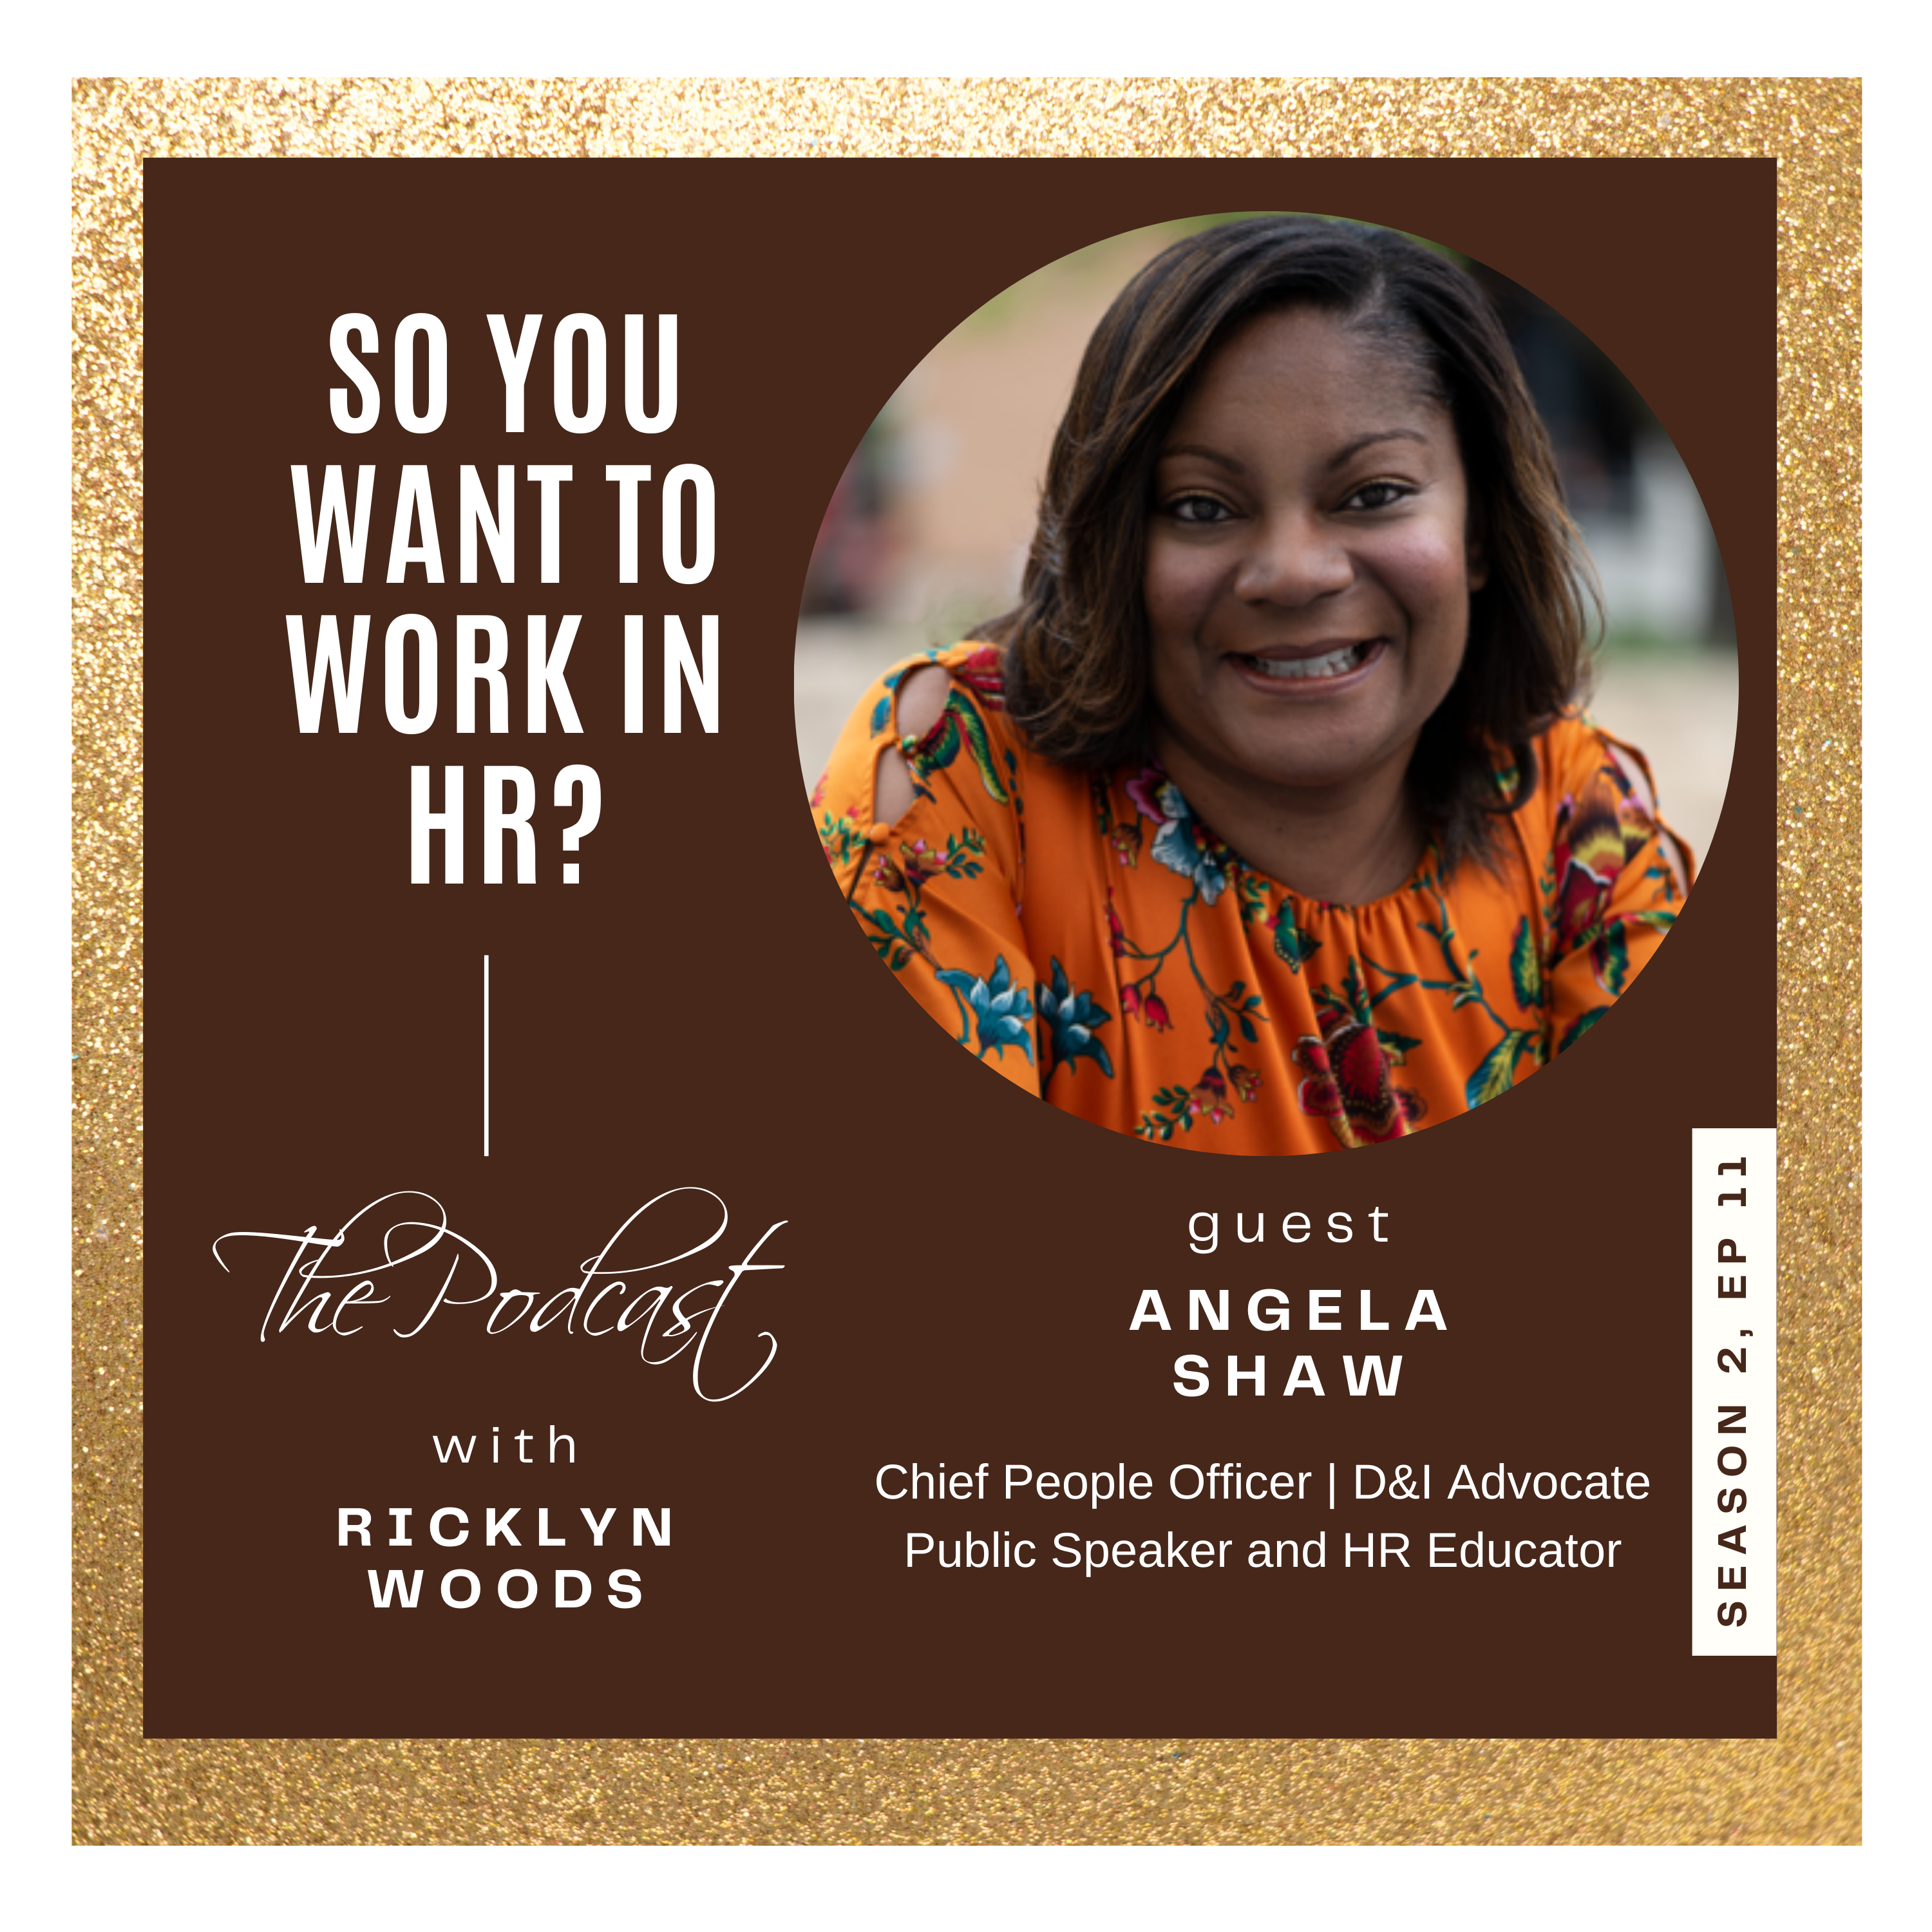 Brown Background with Gold Frame.So You Want To Work In HR The Podcast with Ricklyn Woods Design featuring Angela Shaw, Chief People Officer